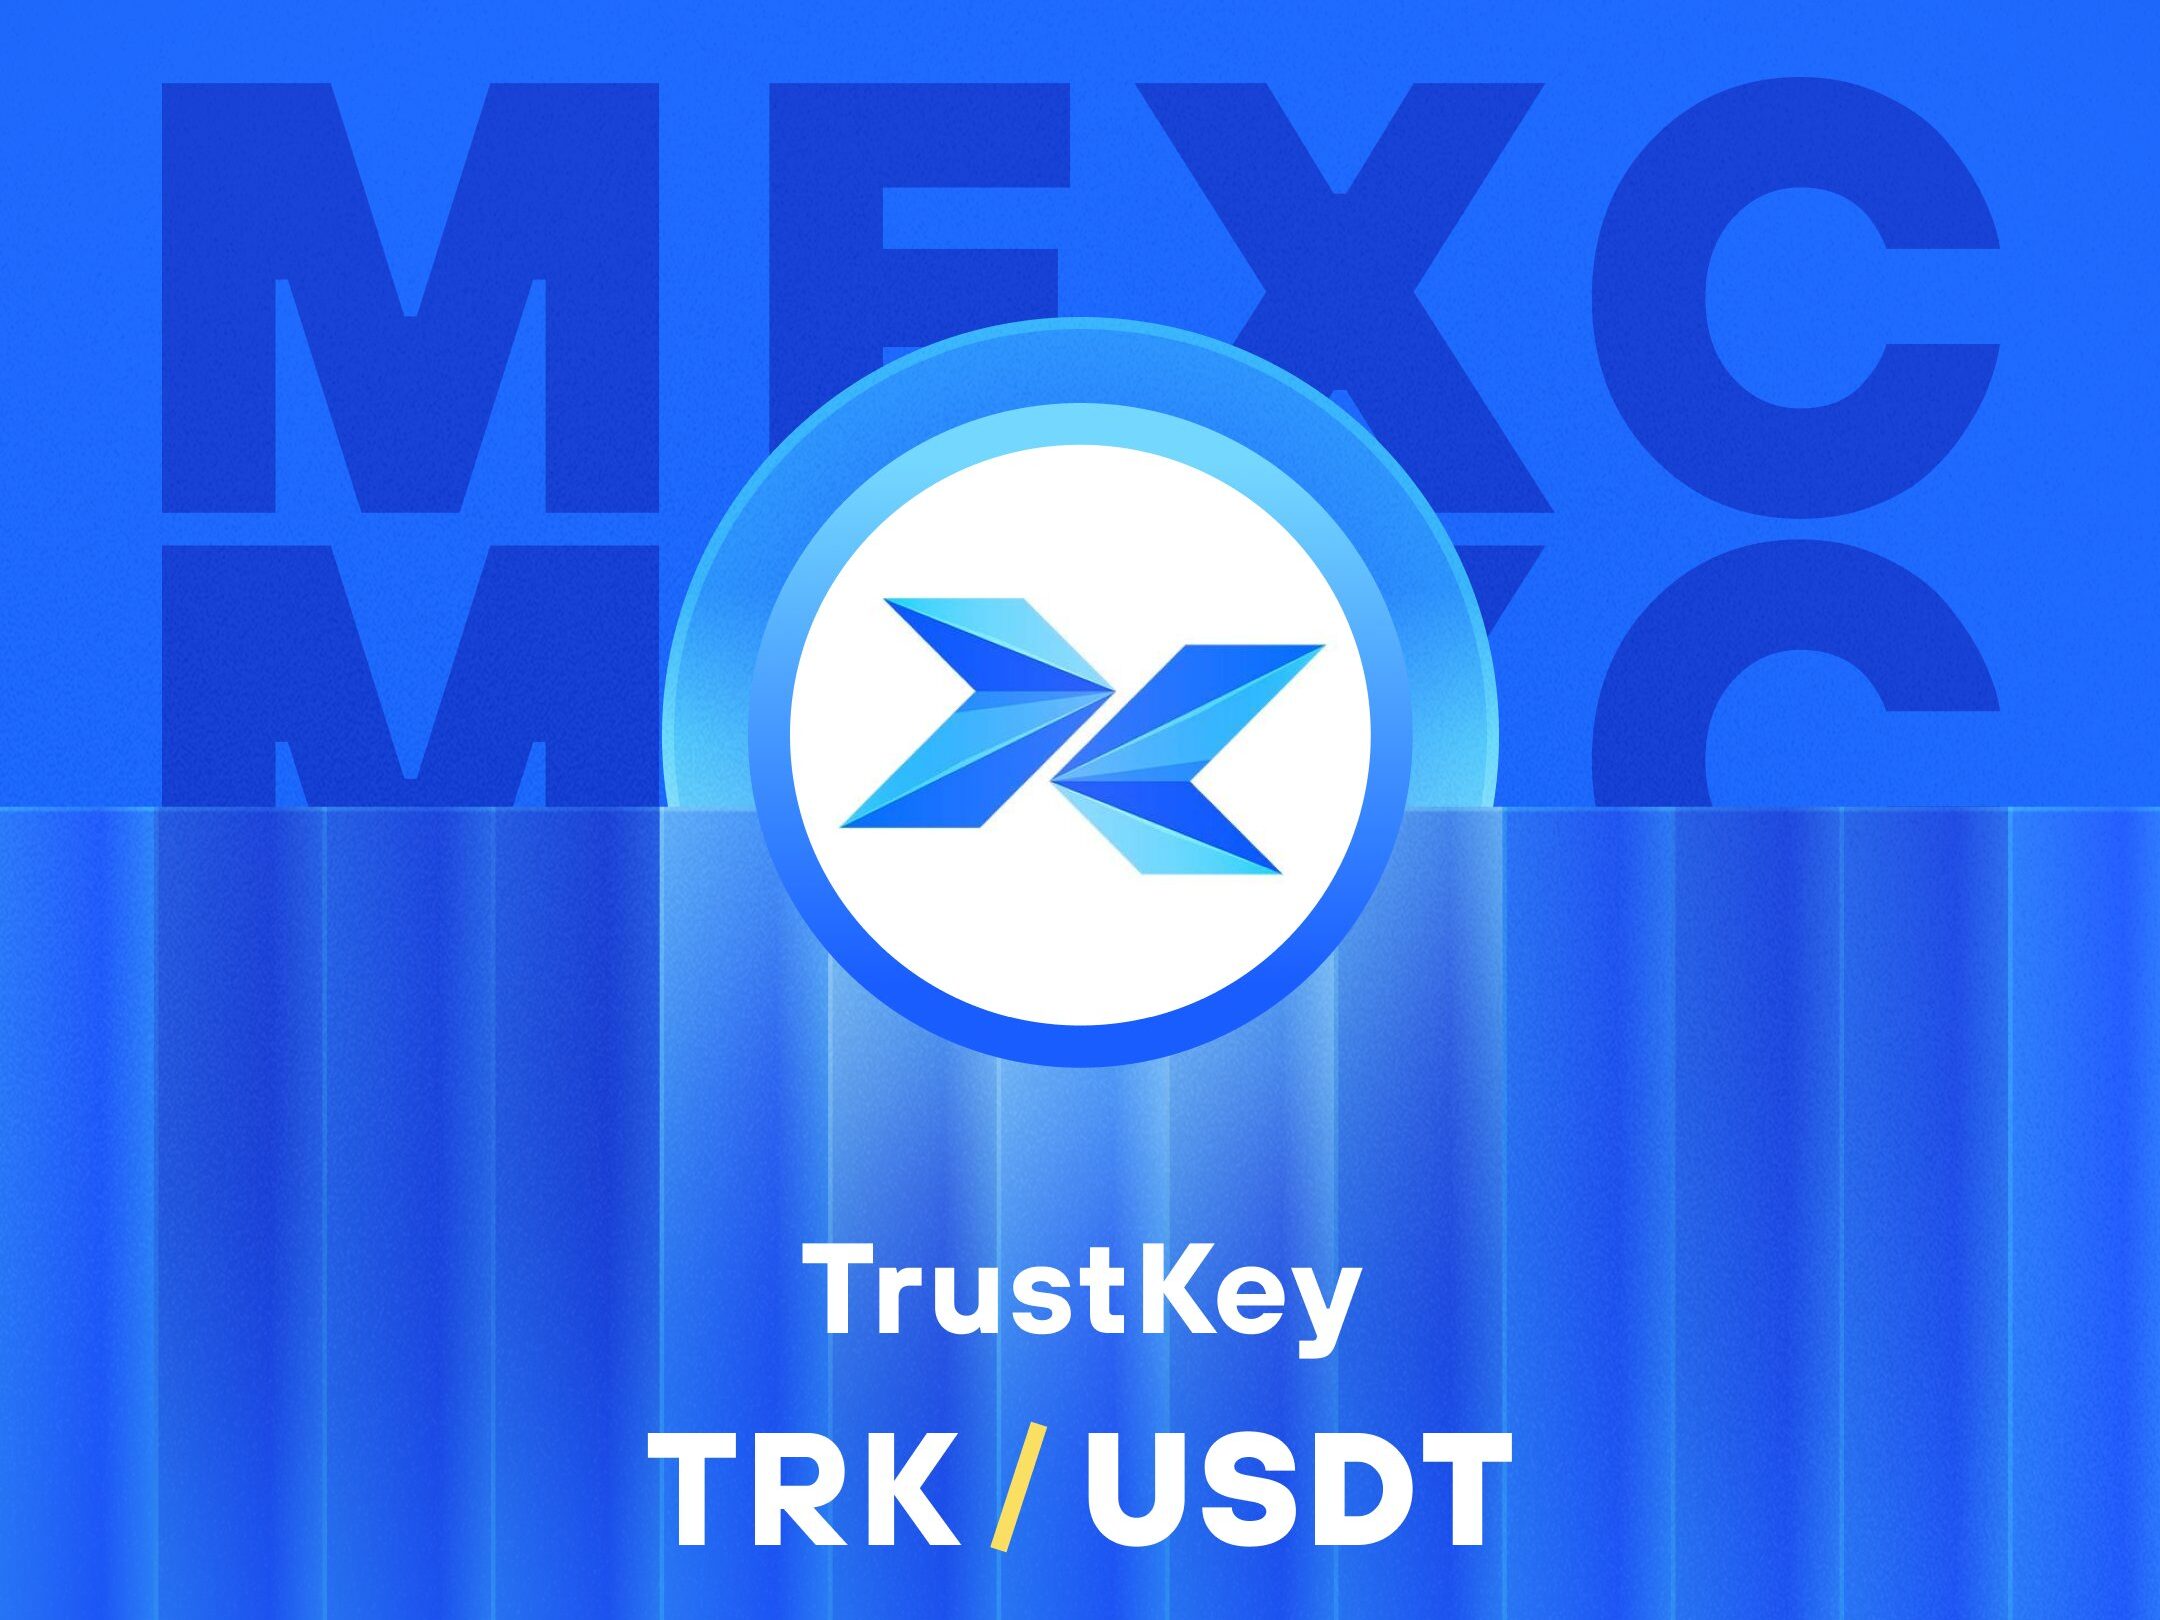 What is TrustKey - A Web3 Wallet Payment Platform (TRK)